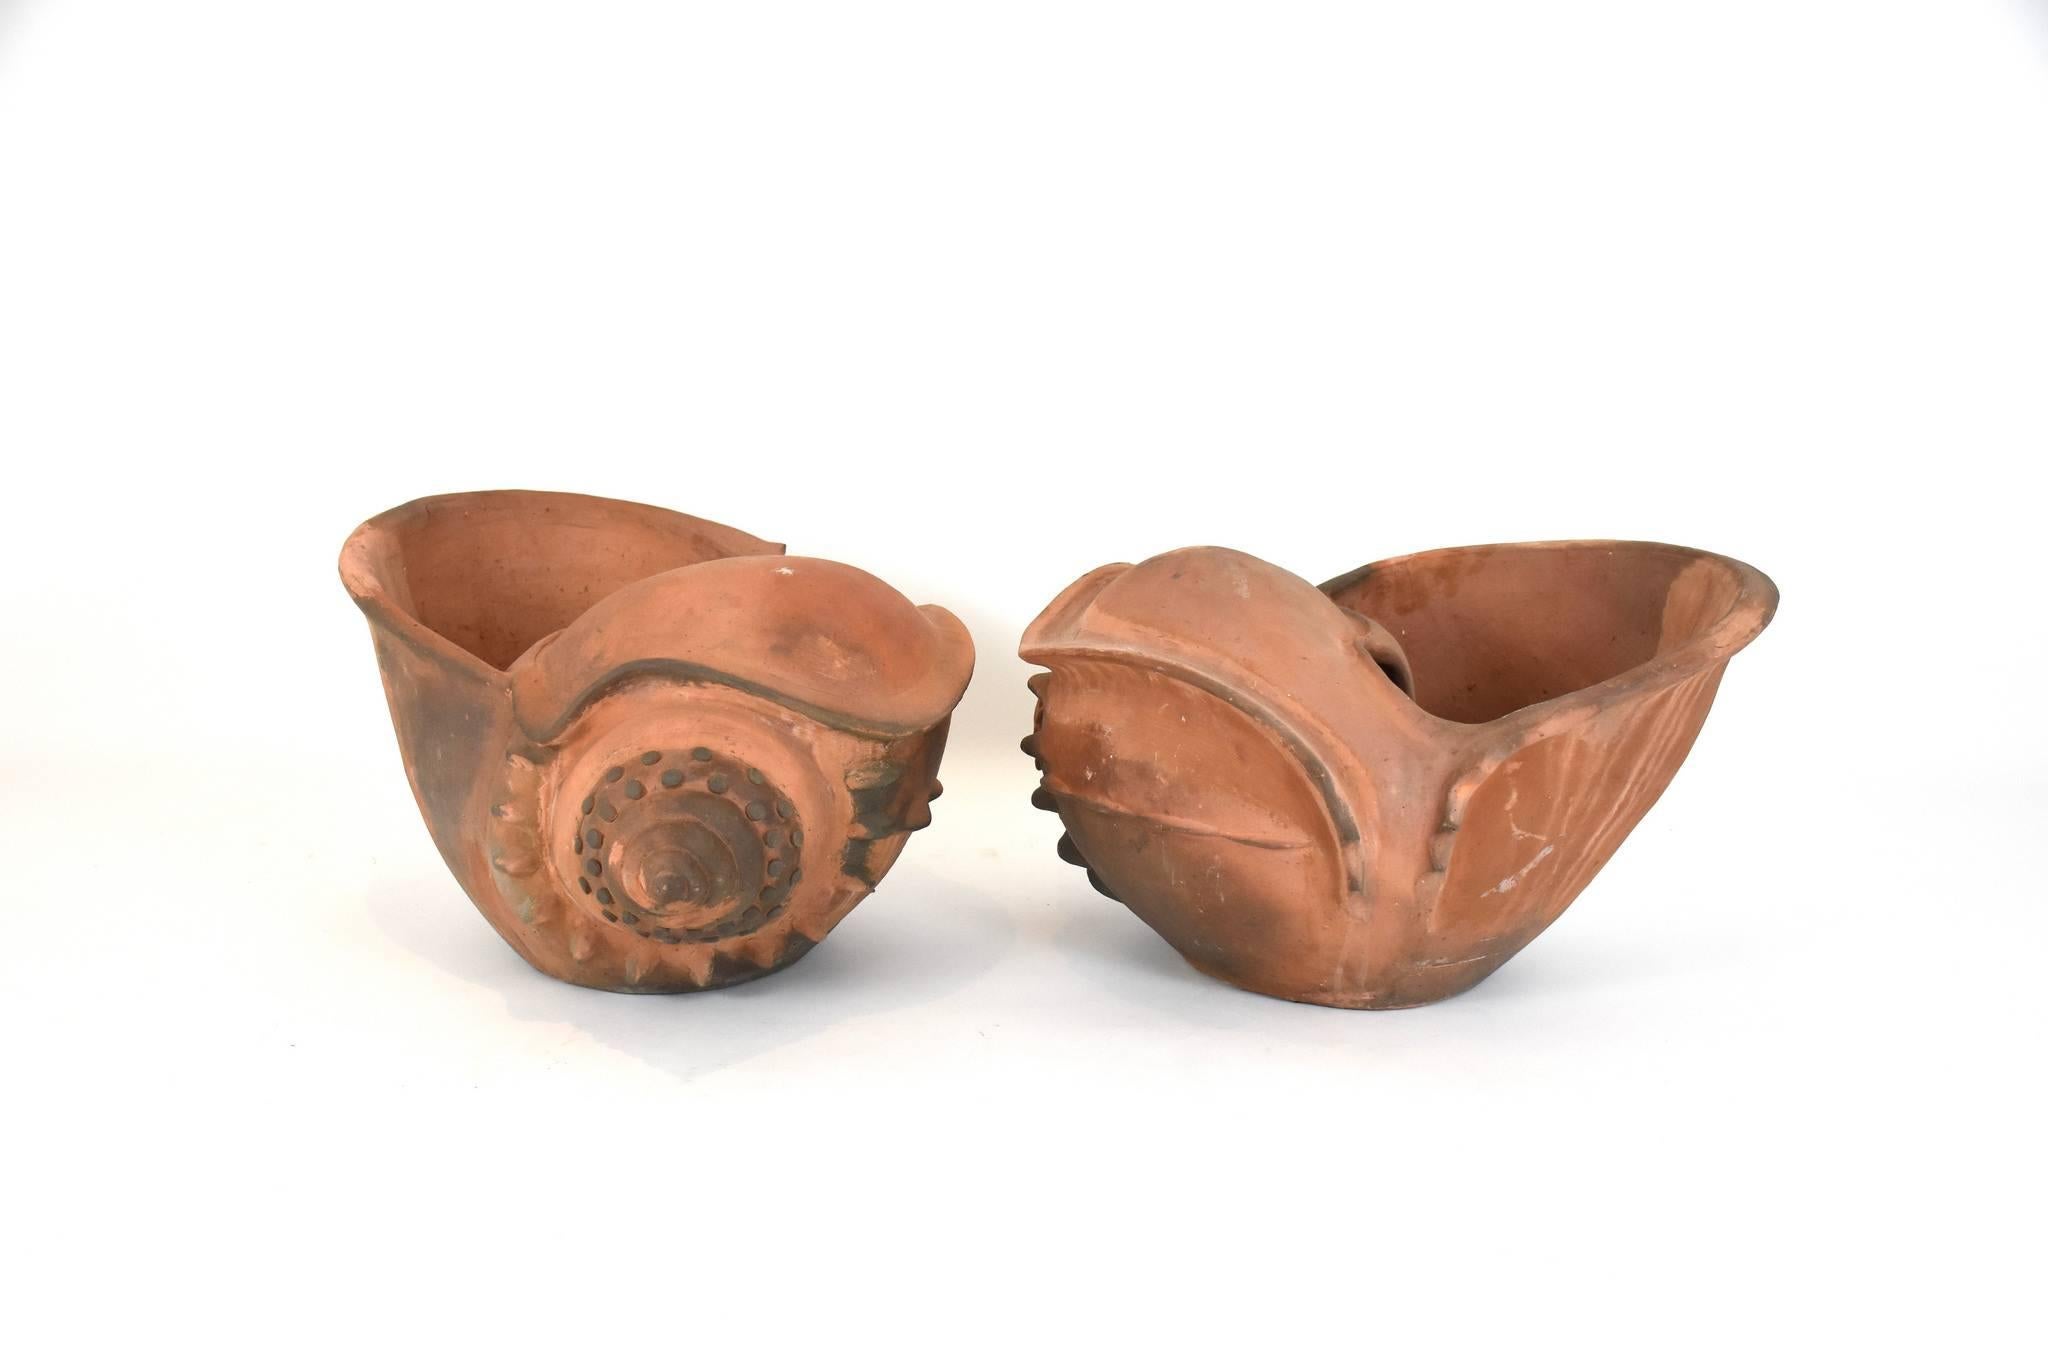 A pair of vintage terracotta shell jardiniere planters once owned by French decorator Madeleine Castaing.